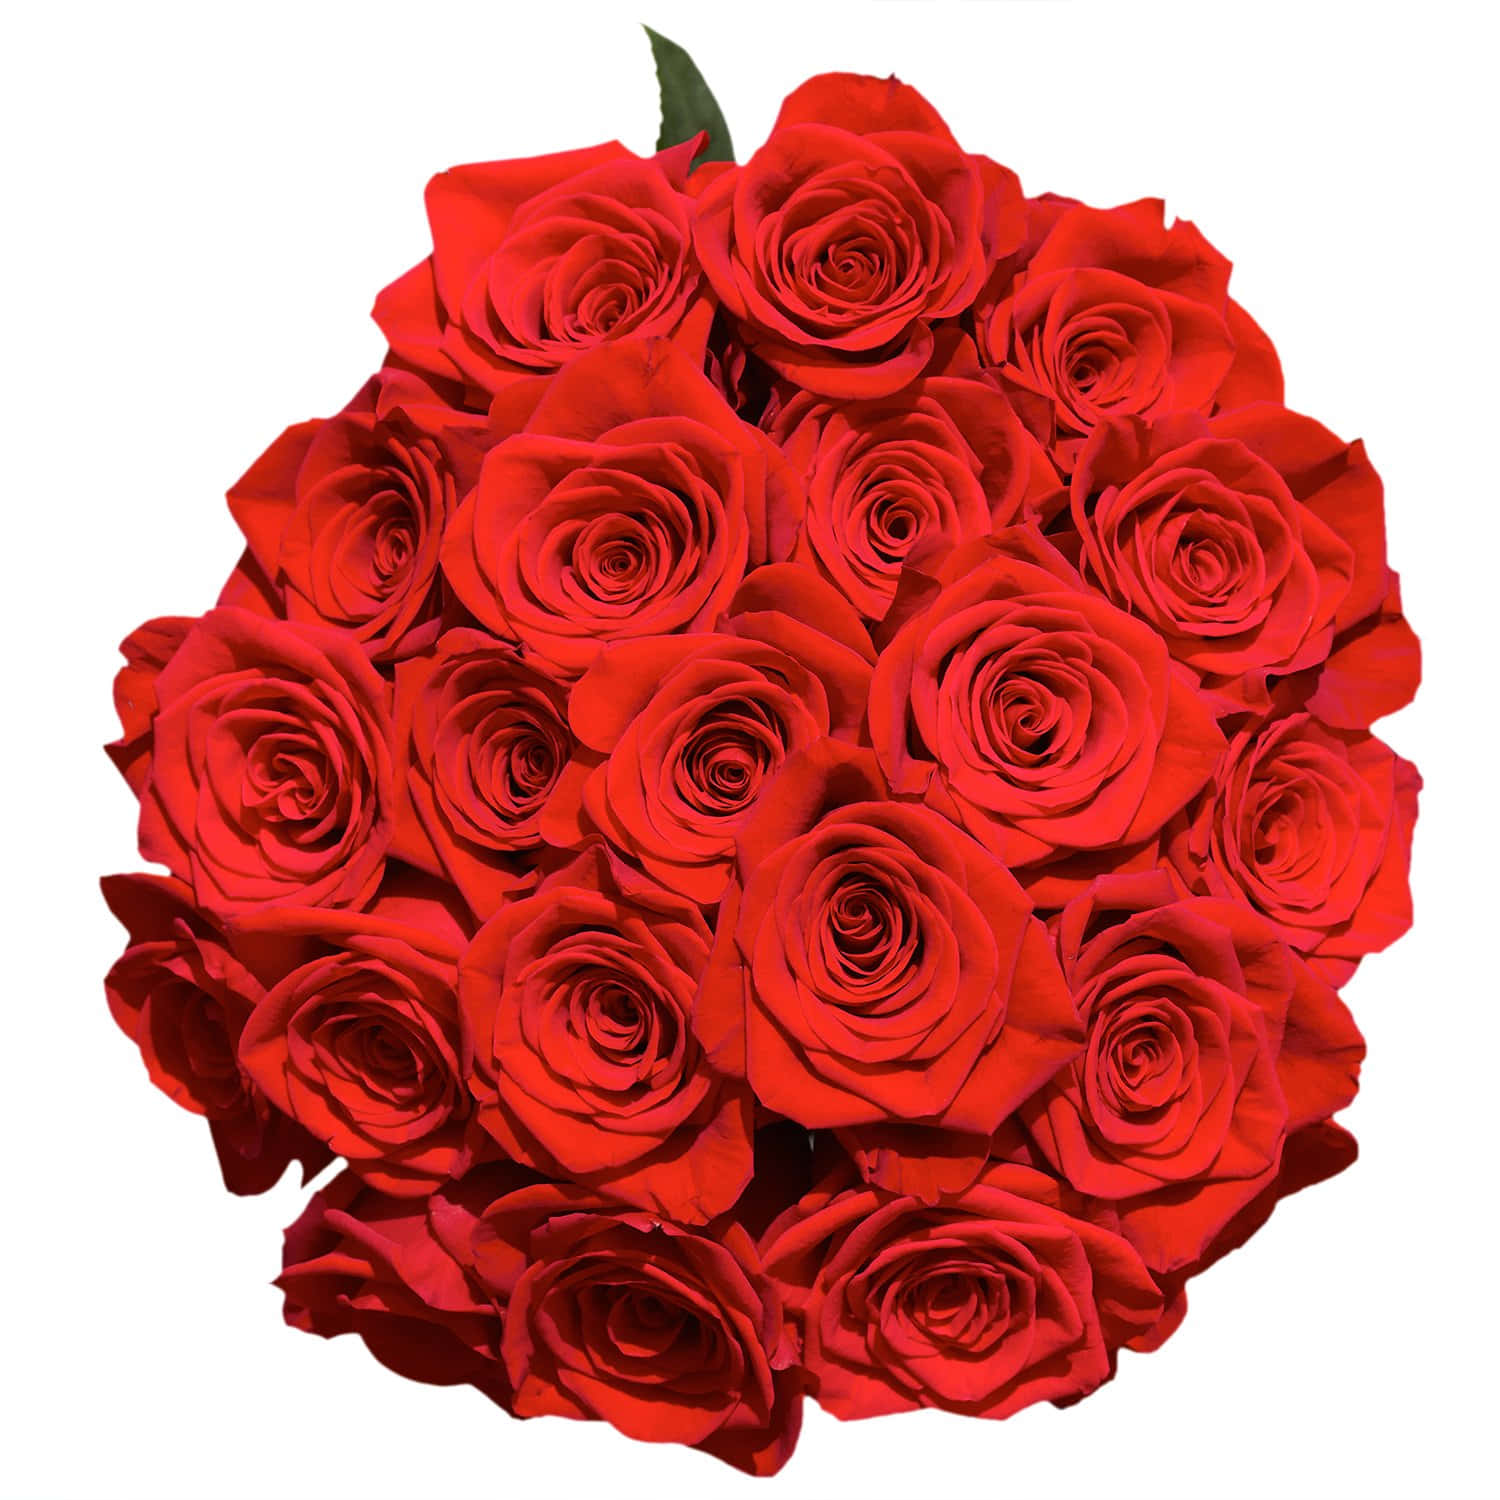 Download Beautiful Roses Red Flower Round Bouquet Picture | Wallpapers.com